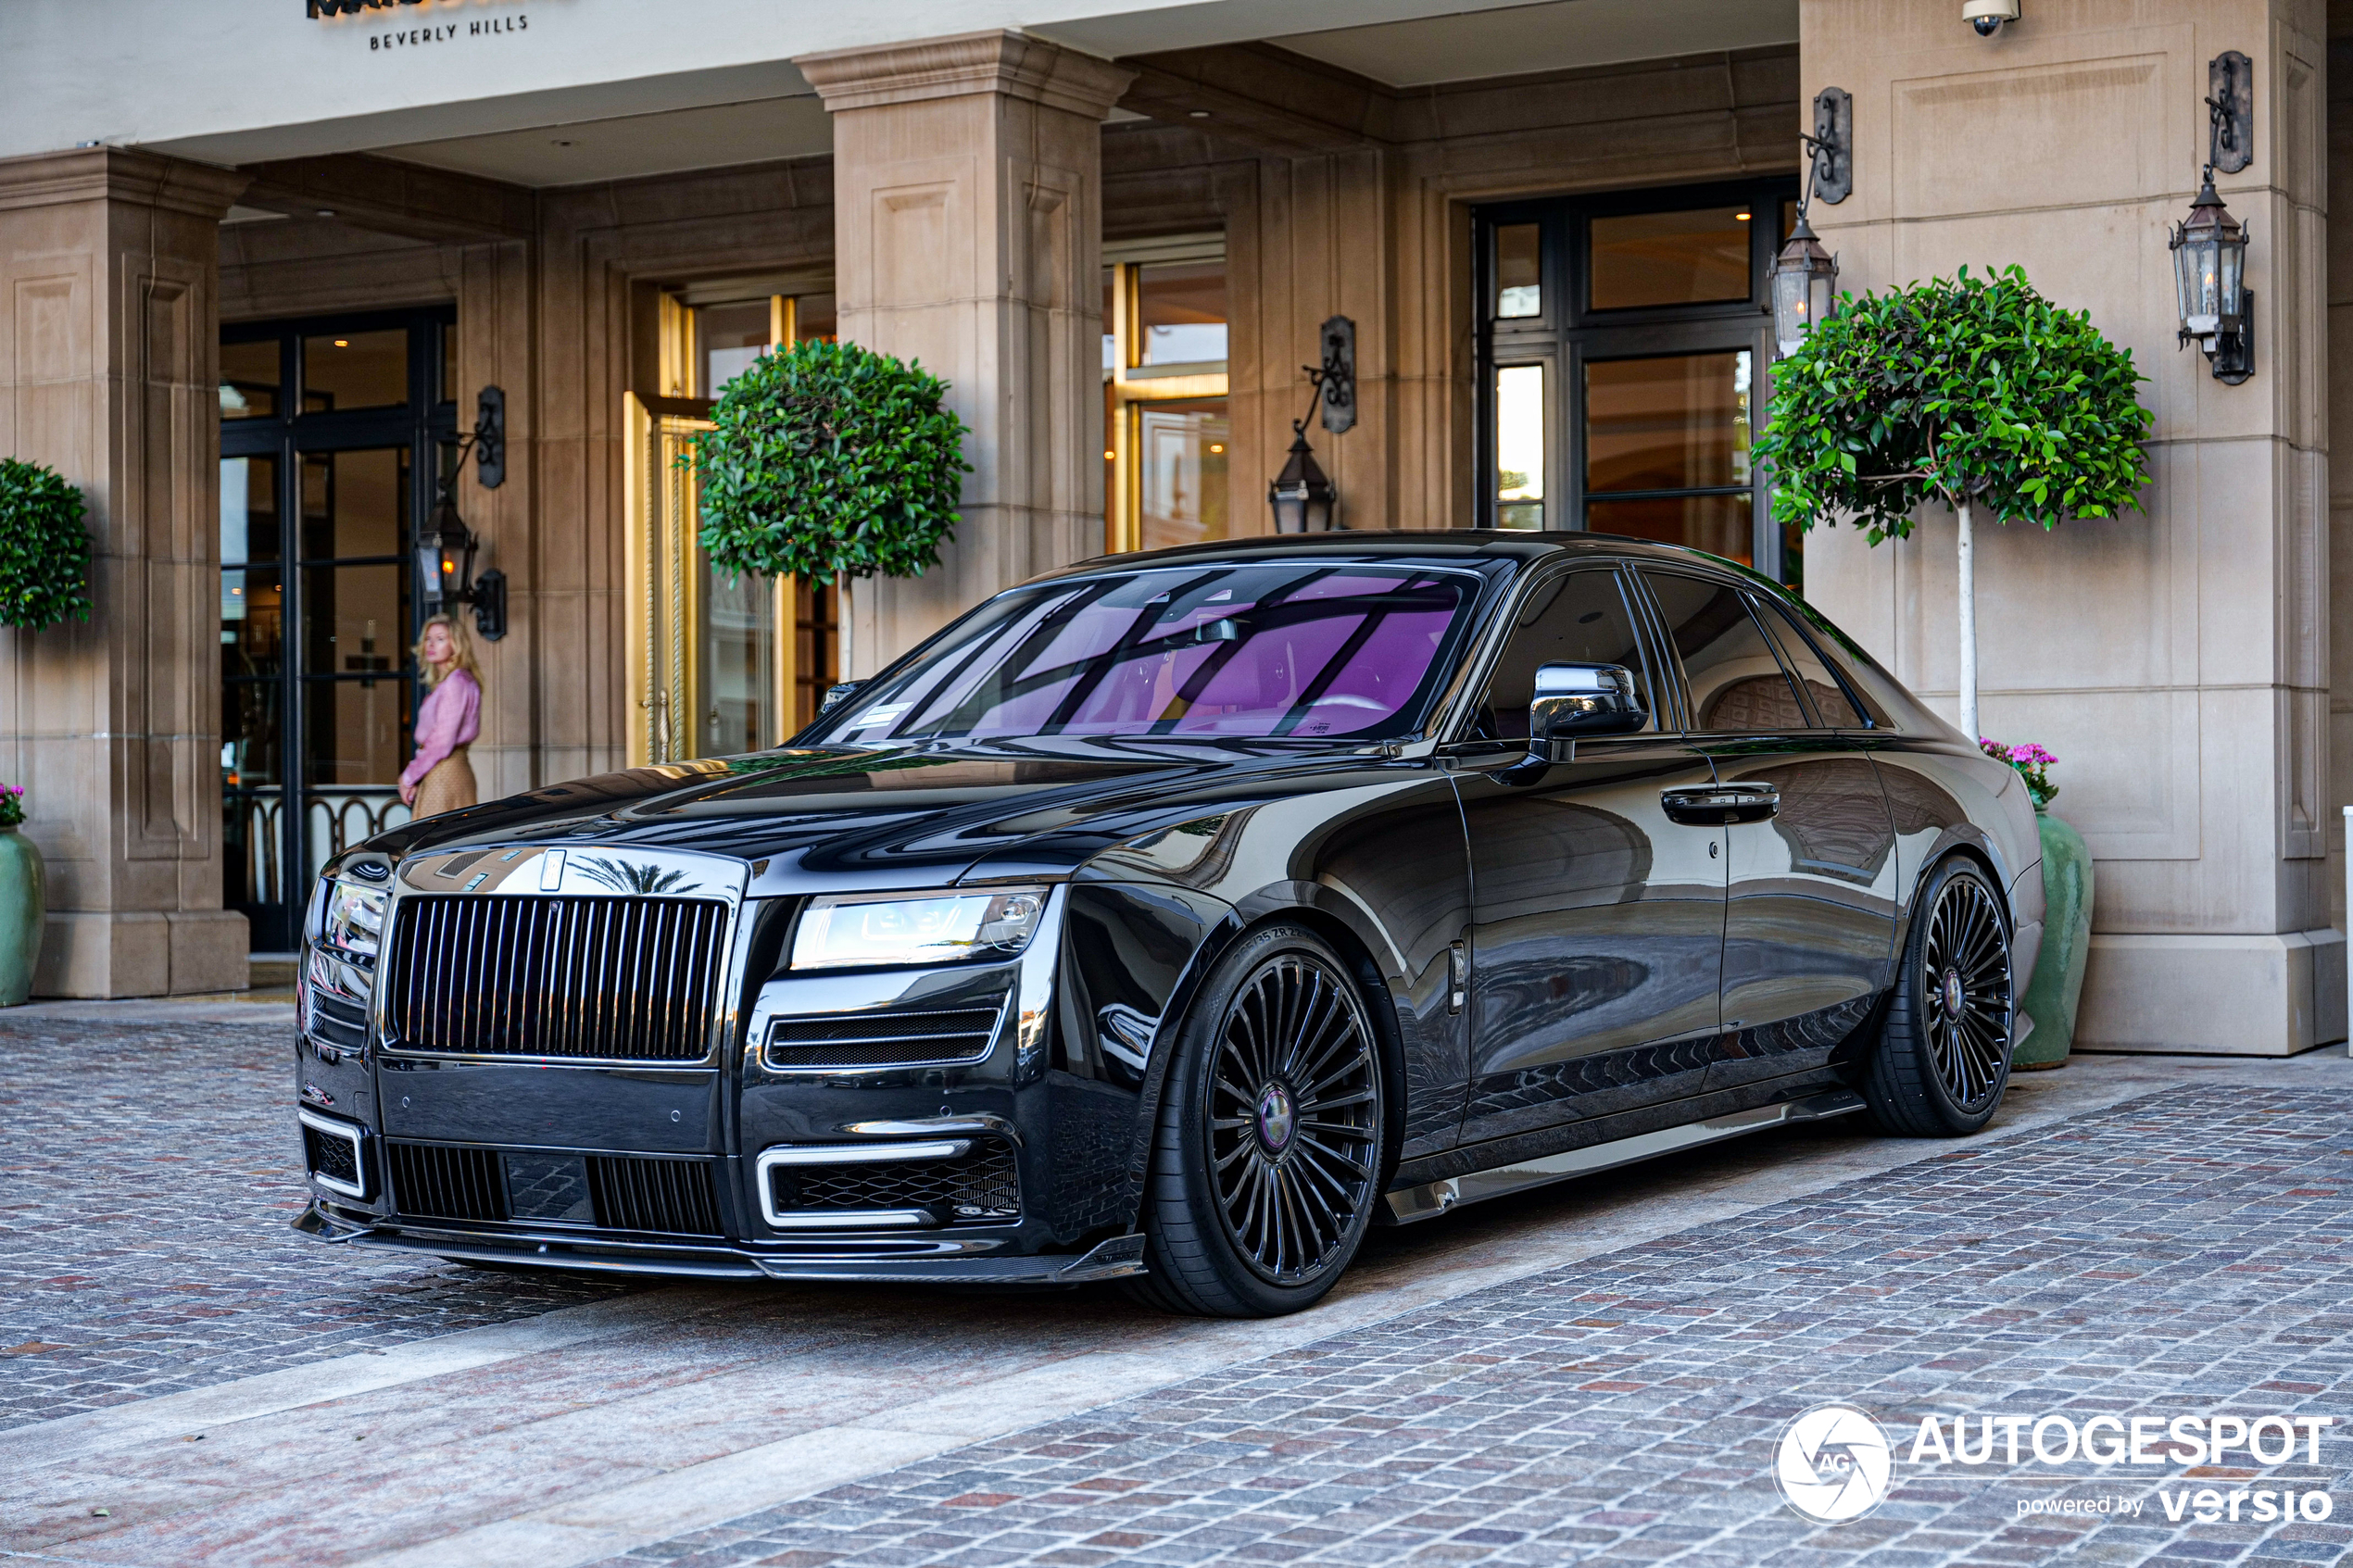 You won't believe the price of this Rolls-Royce Phantom by Mansory